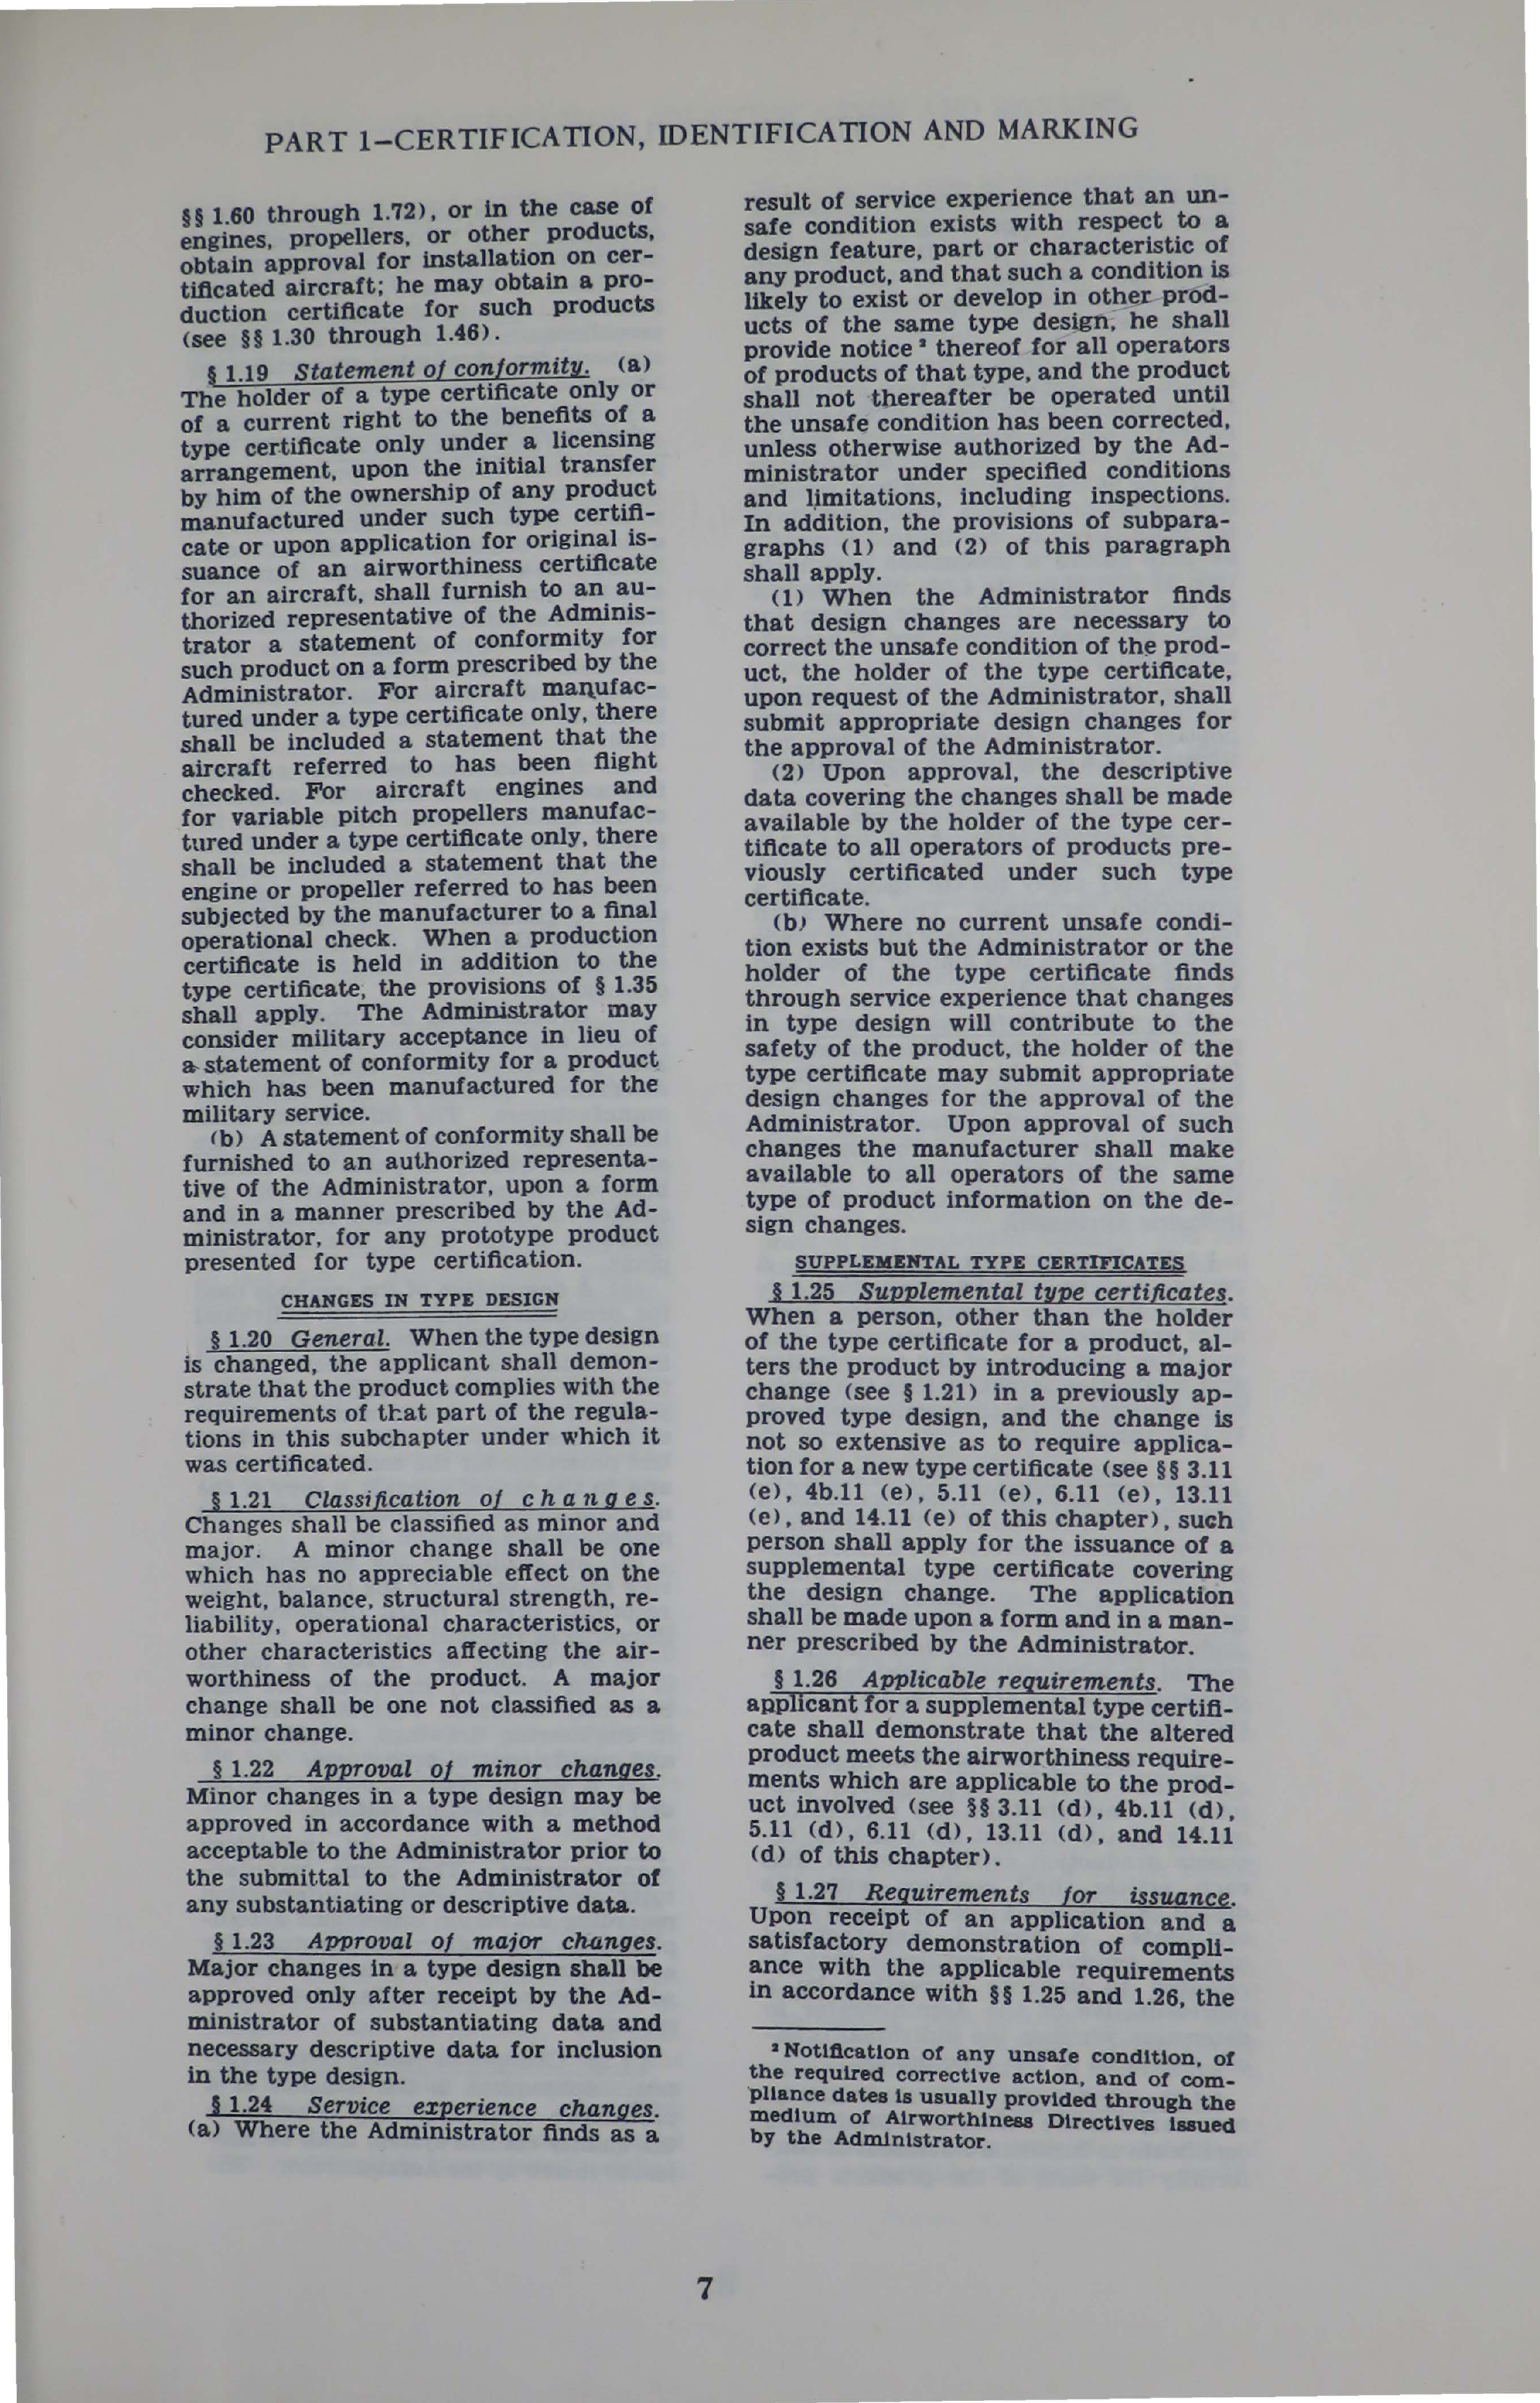 Sample page 9 from AirCorps Library document: Civil Air Regulations for Mechanics